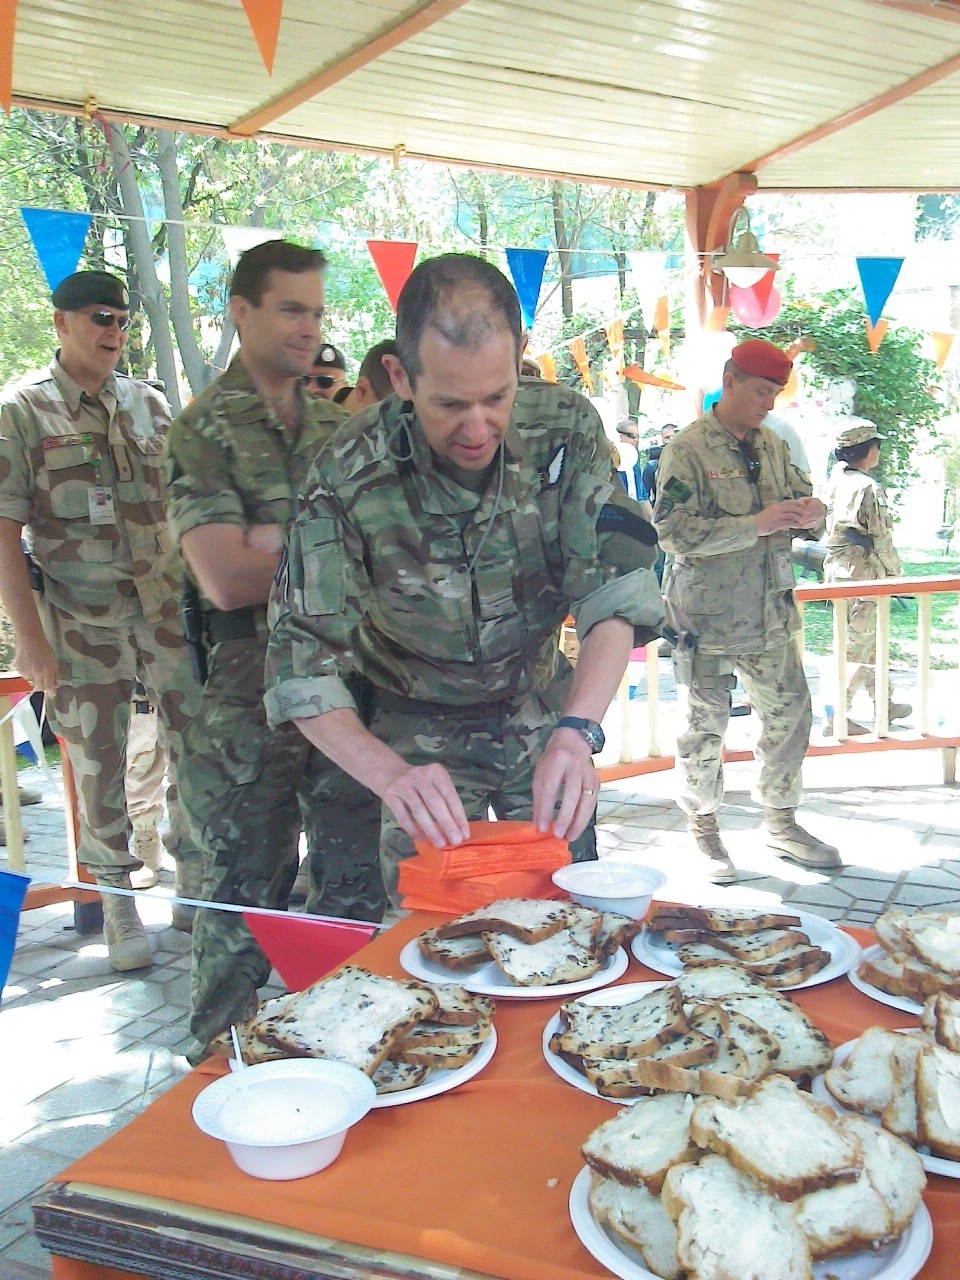 Dutch celebrate Queen's Day with coalition partners in Kabul